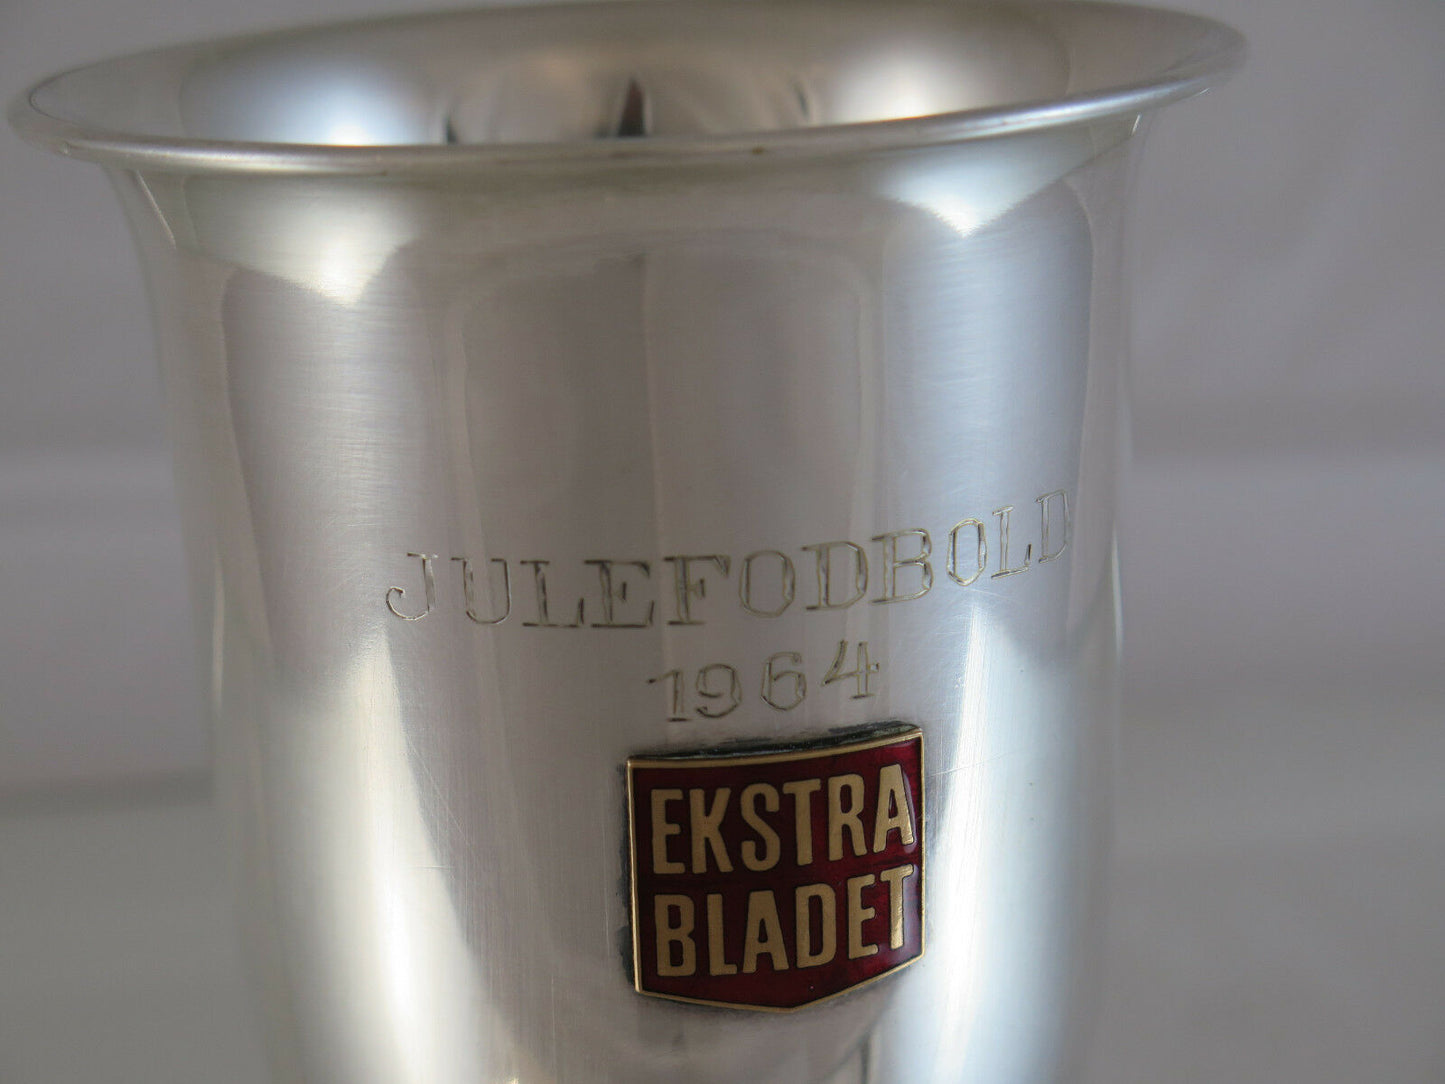 ANTIQUE SILVER-PLATED GLASS JULEFODBOLD CUP COLLECTION EKSTRA BLADET 1964 R60